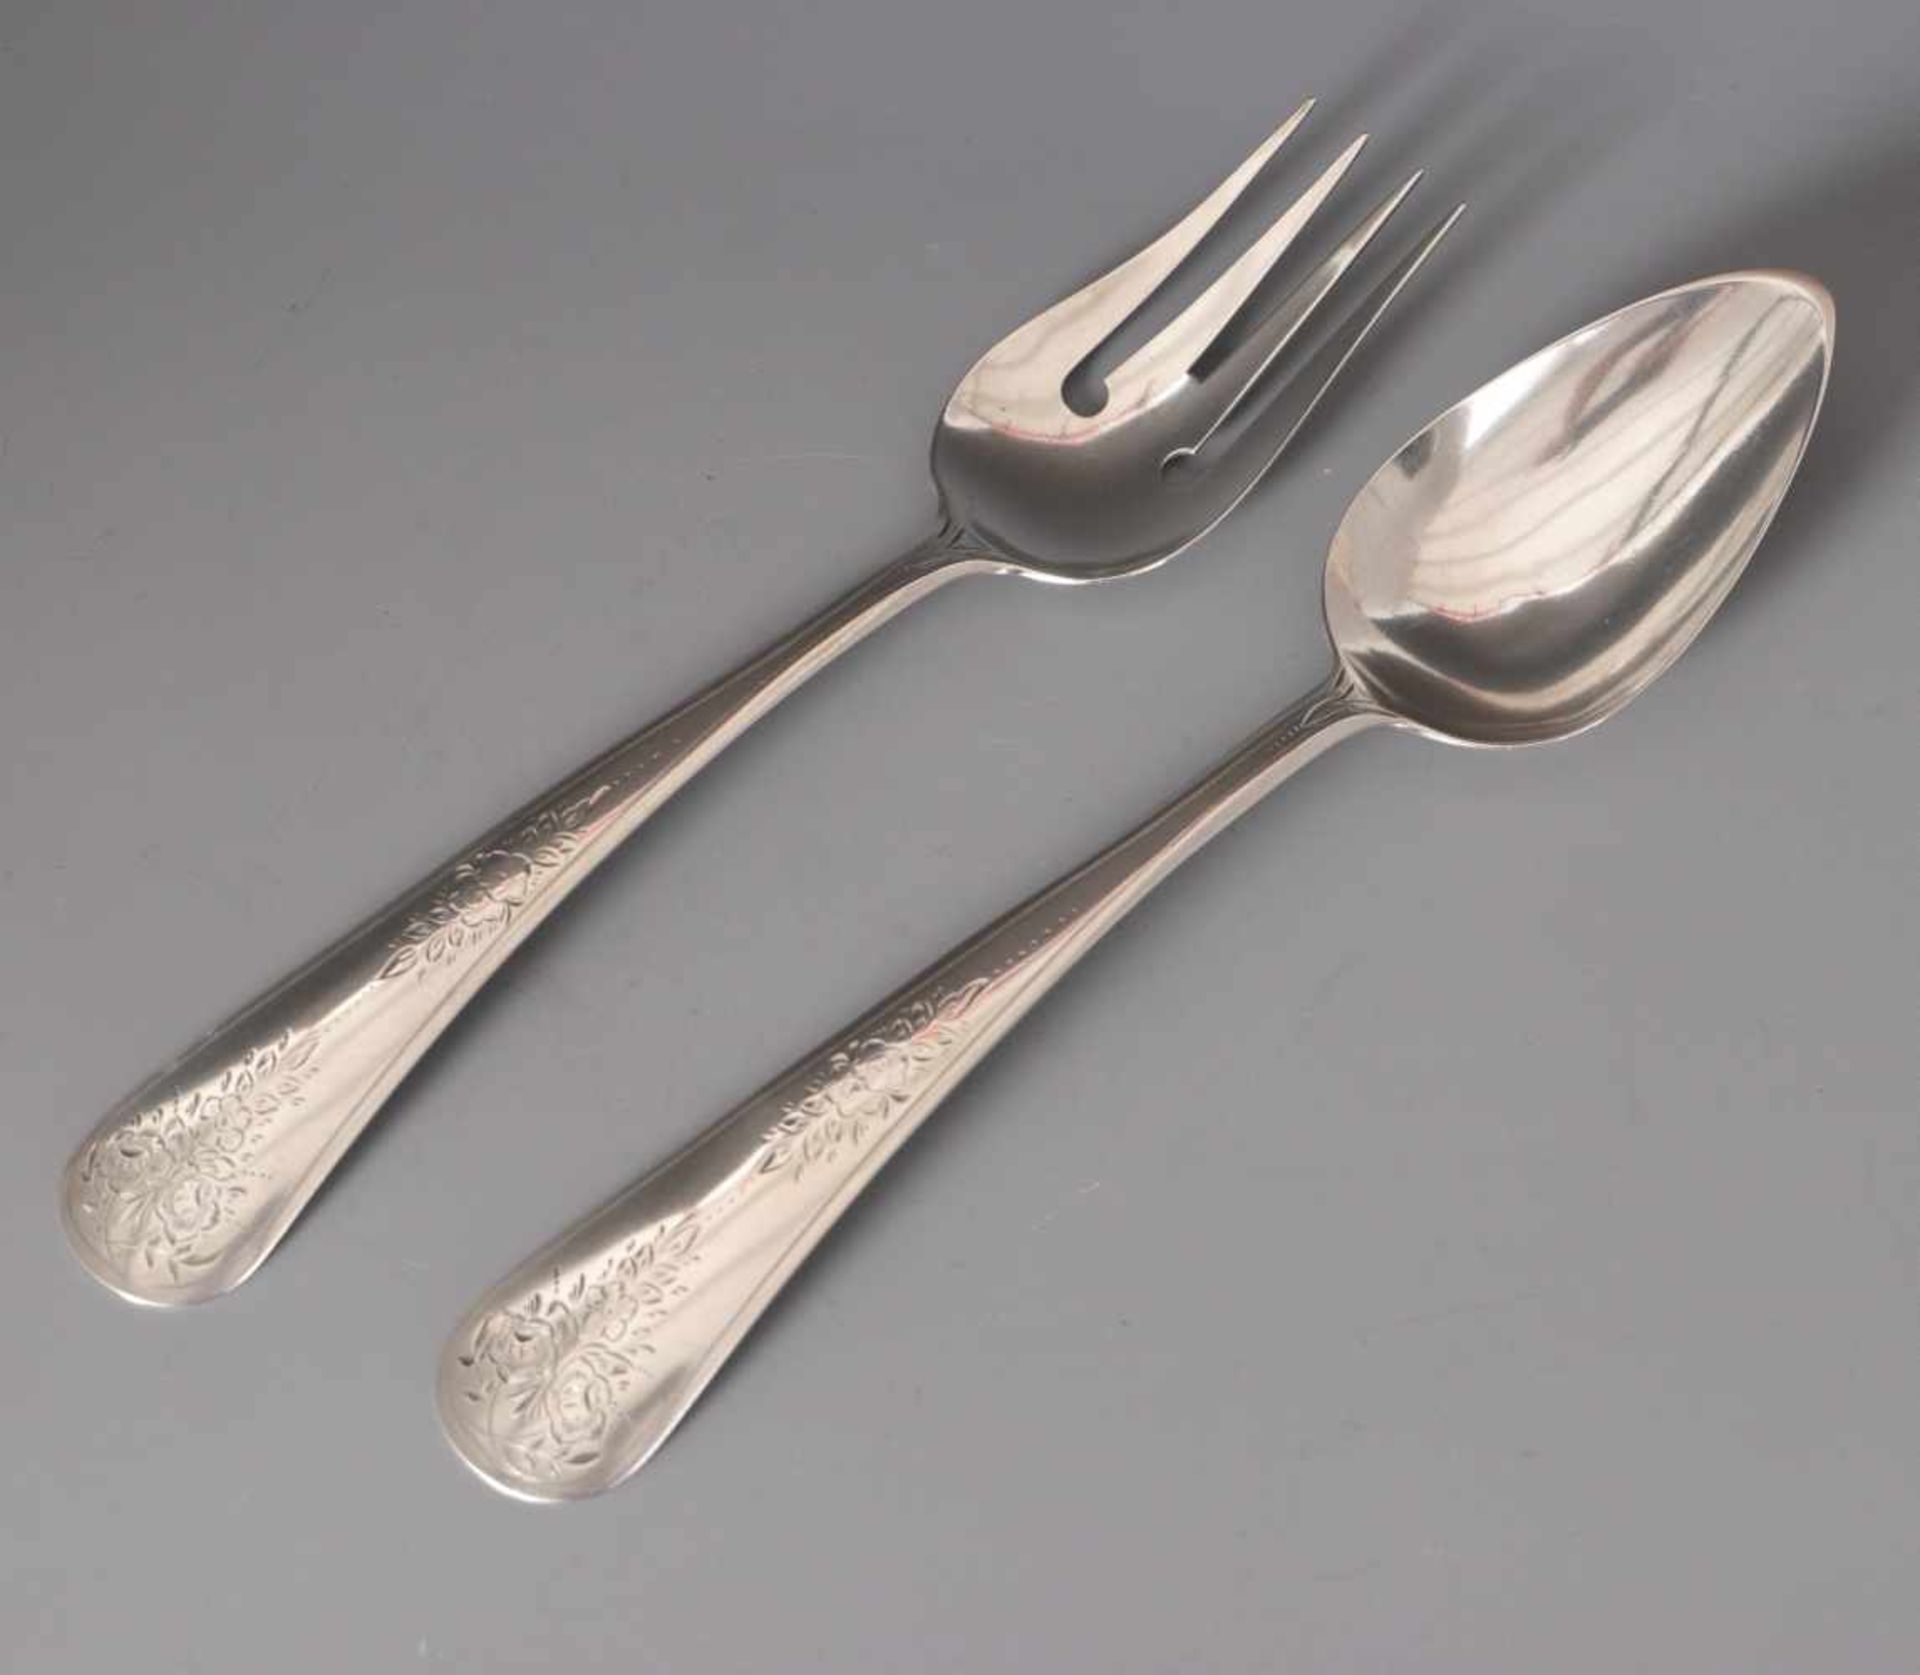 A Silver salad serving fork and spoon, dated 1884A Silver salad serving fork and spoon, dated